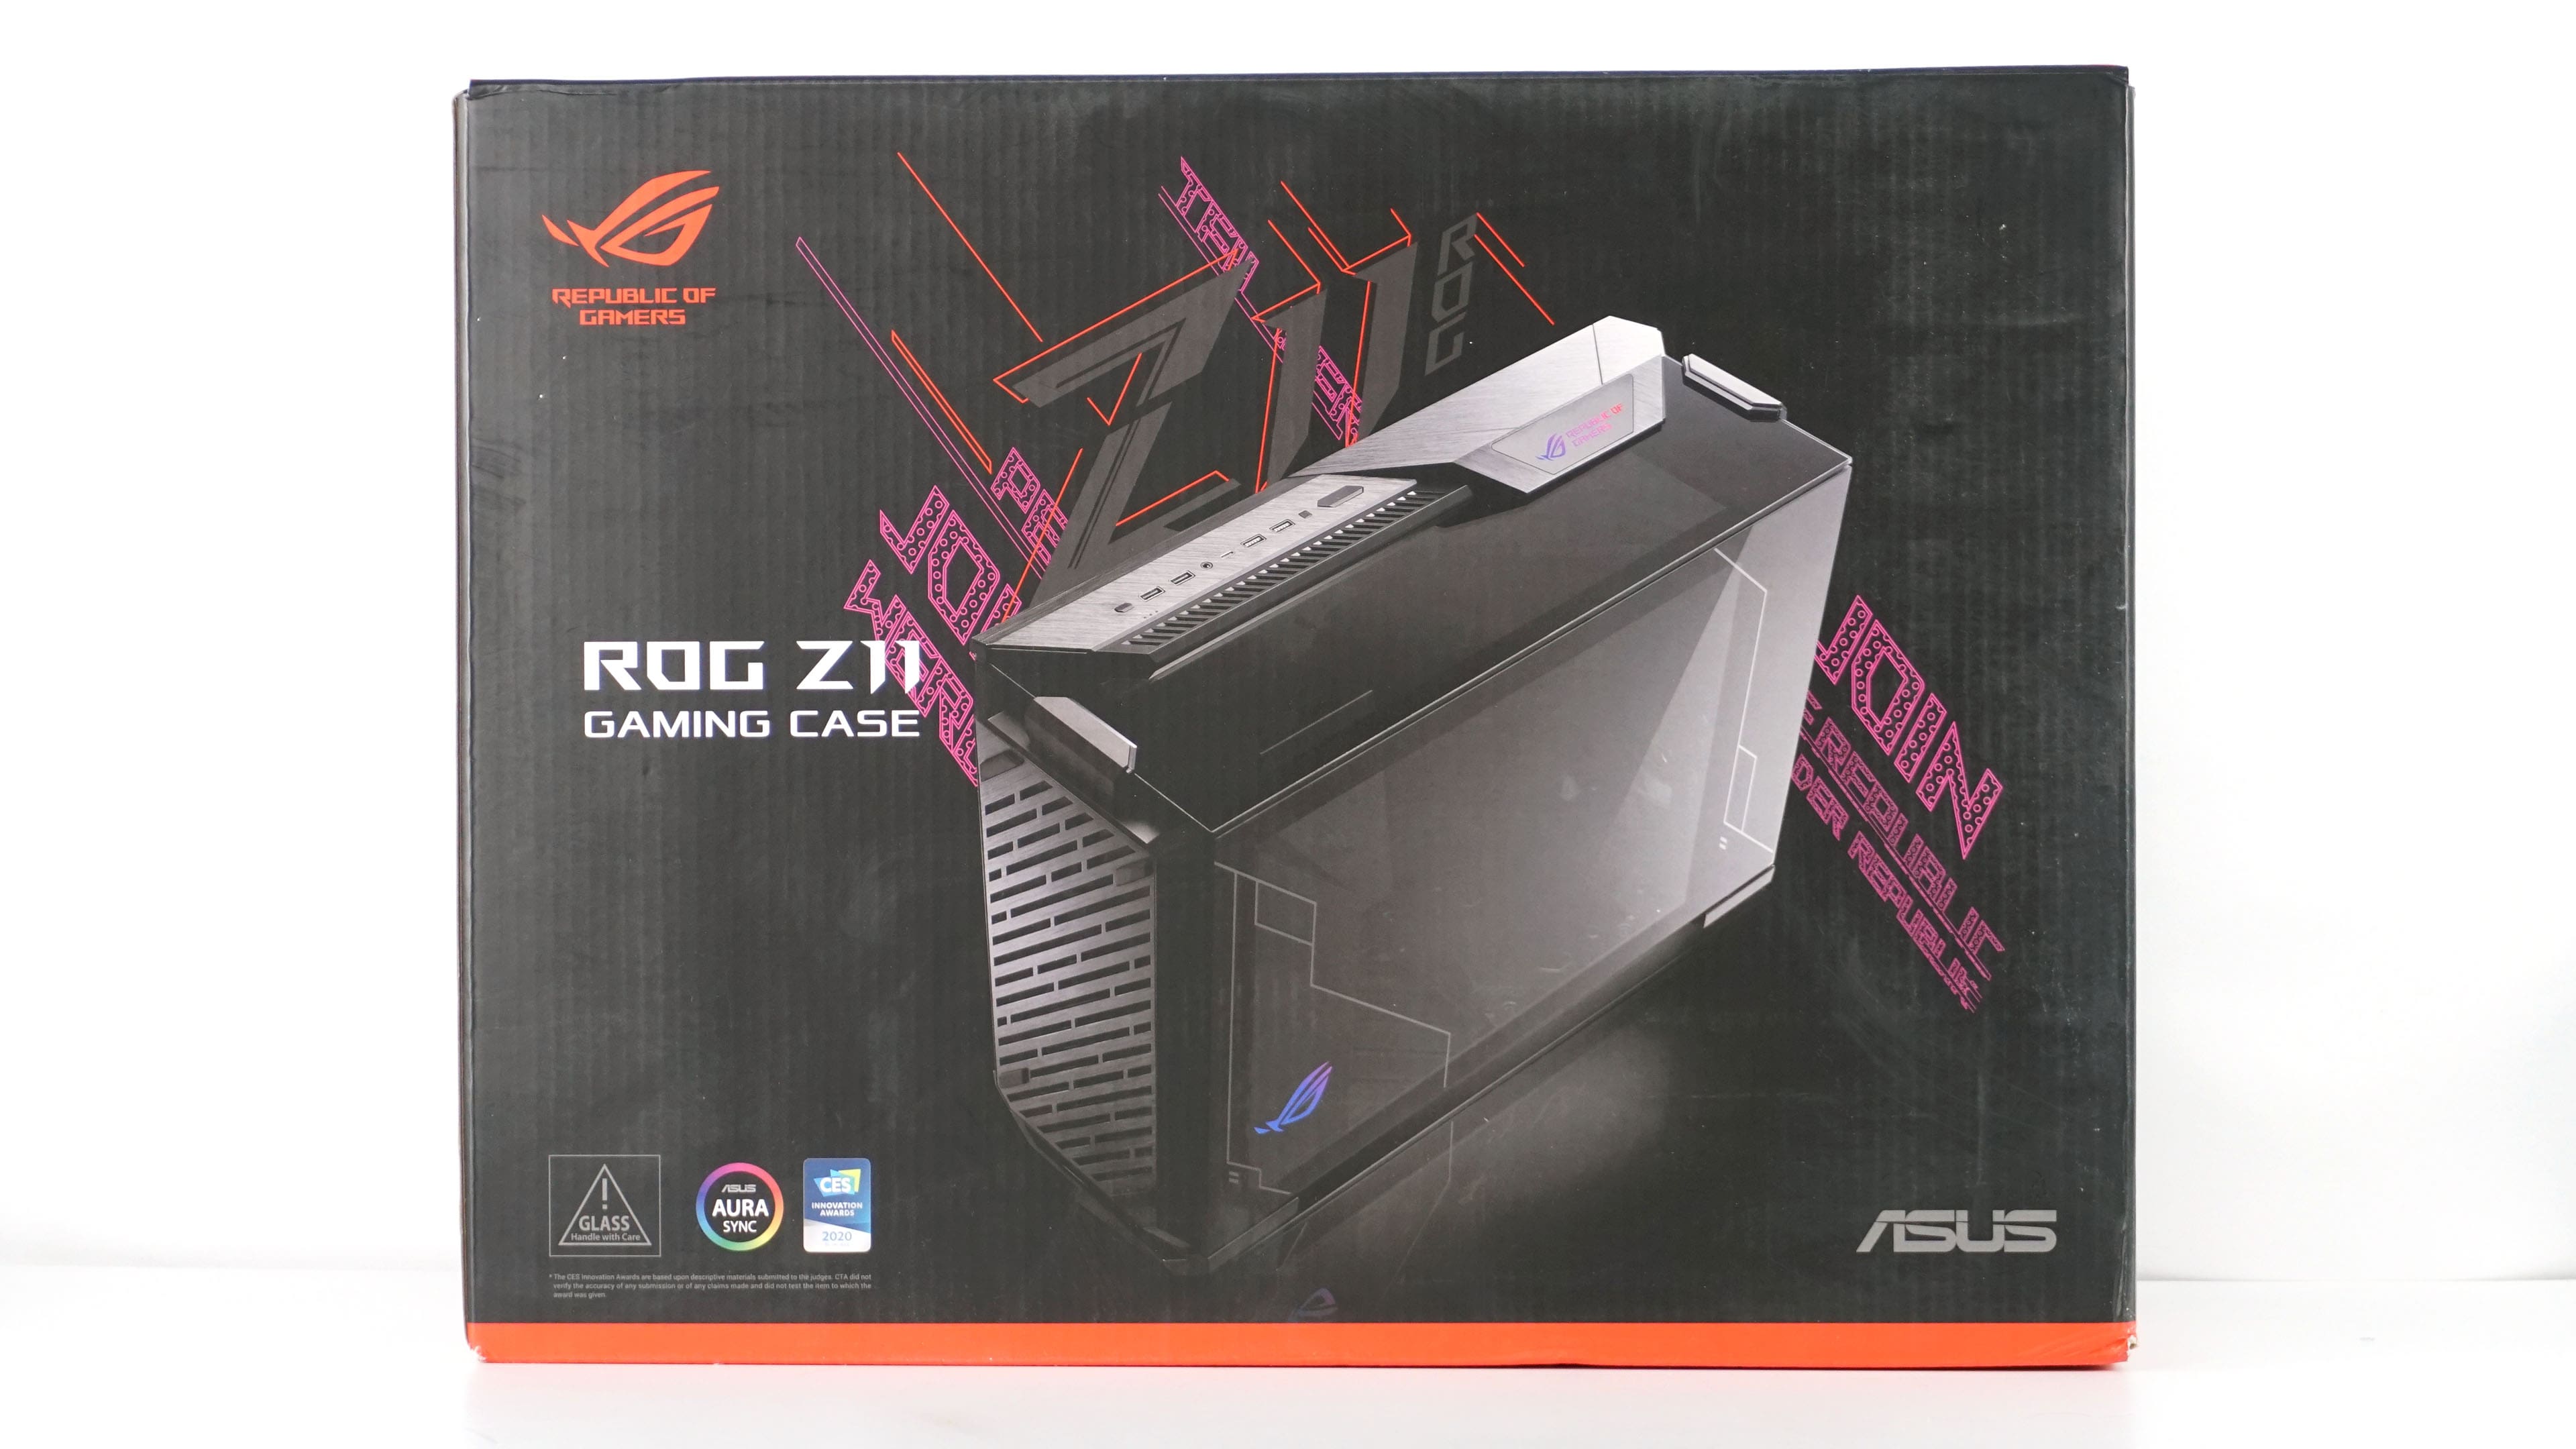 Something for Asus fans: a complete ROG build in the Z11 case 